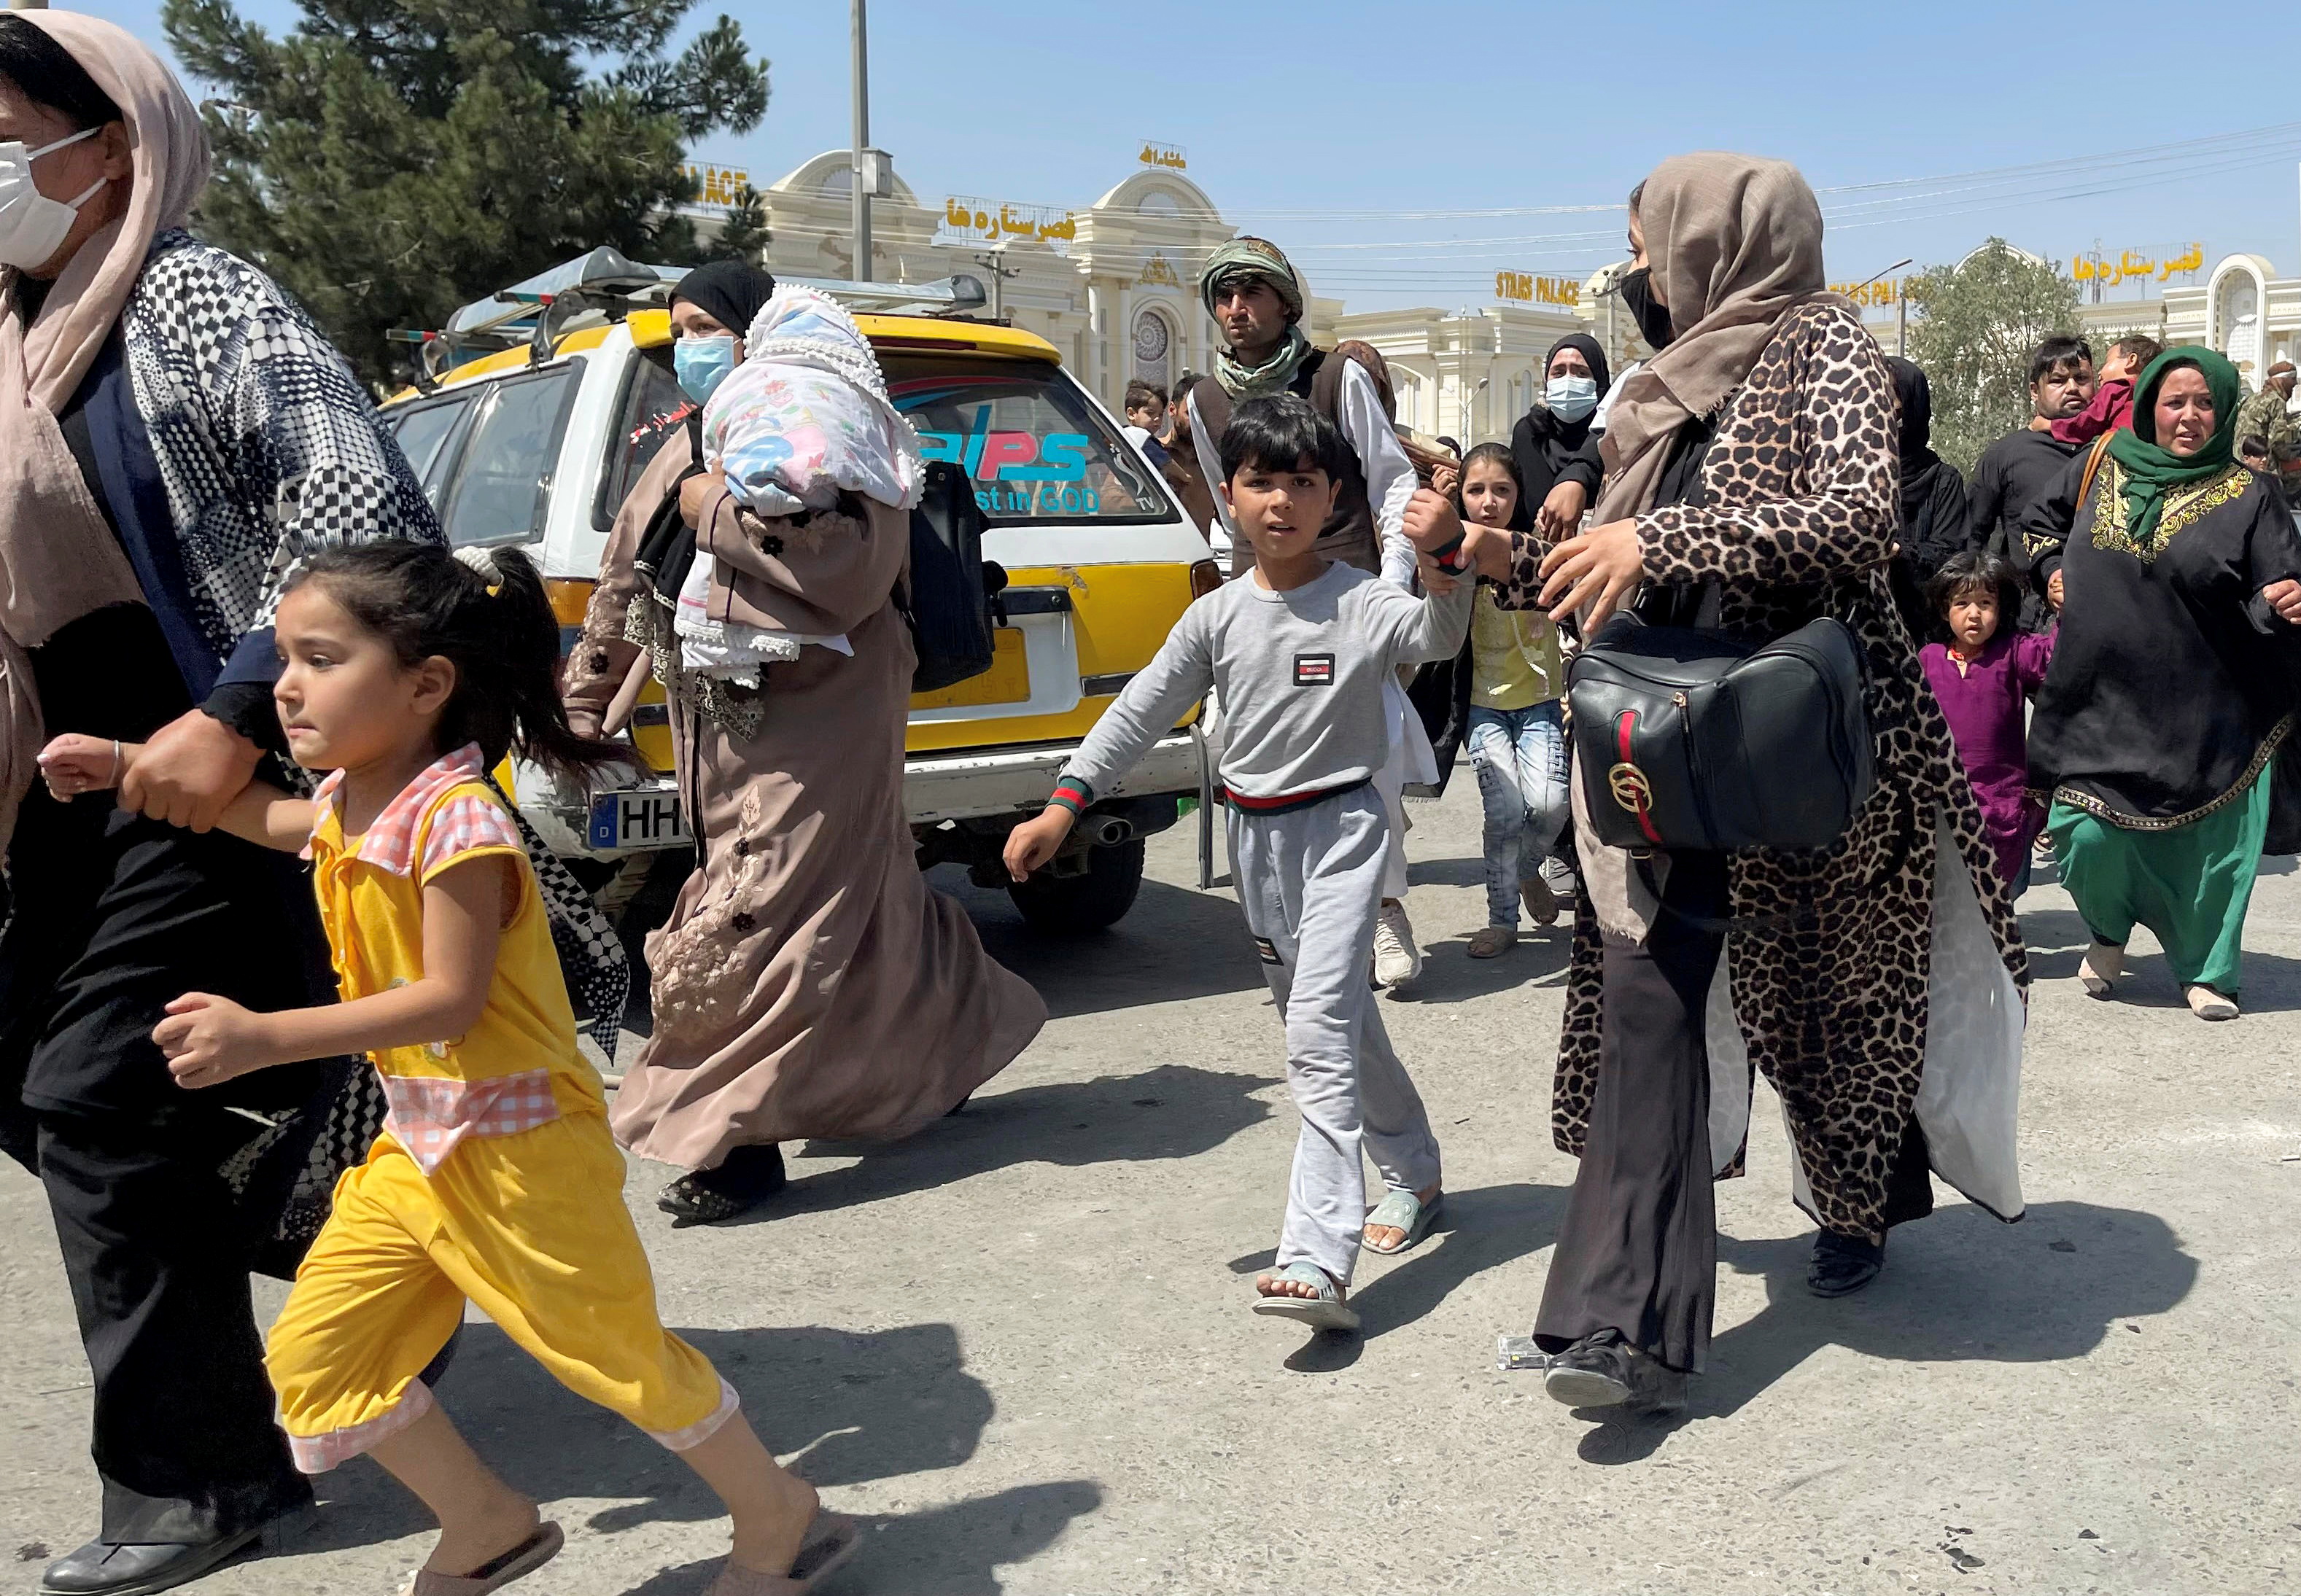 Women with their children try to get inside Hamid Karzai International Airport in Kabul, Afghanistan August 16, 2021. REUTERS/Stringer